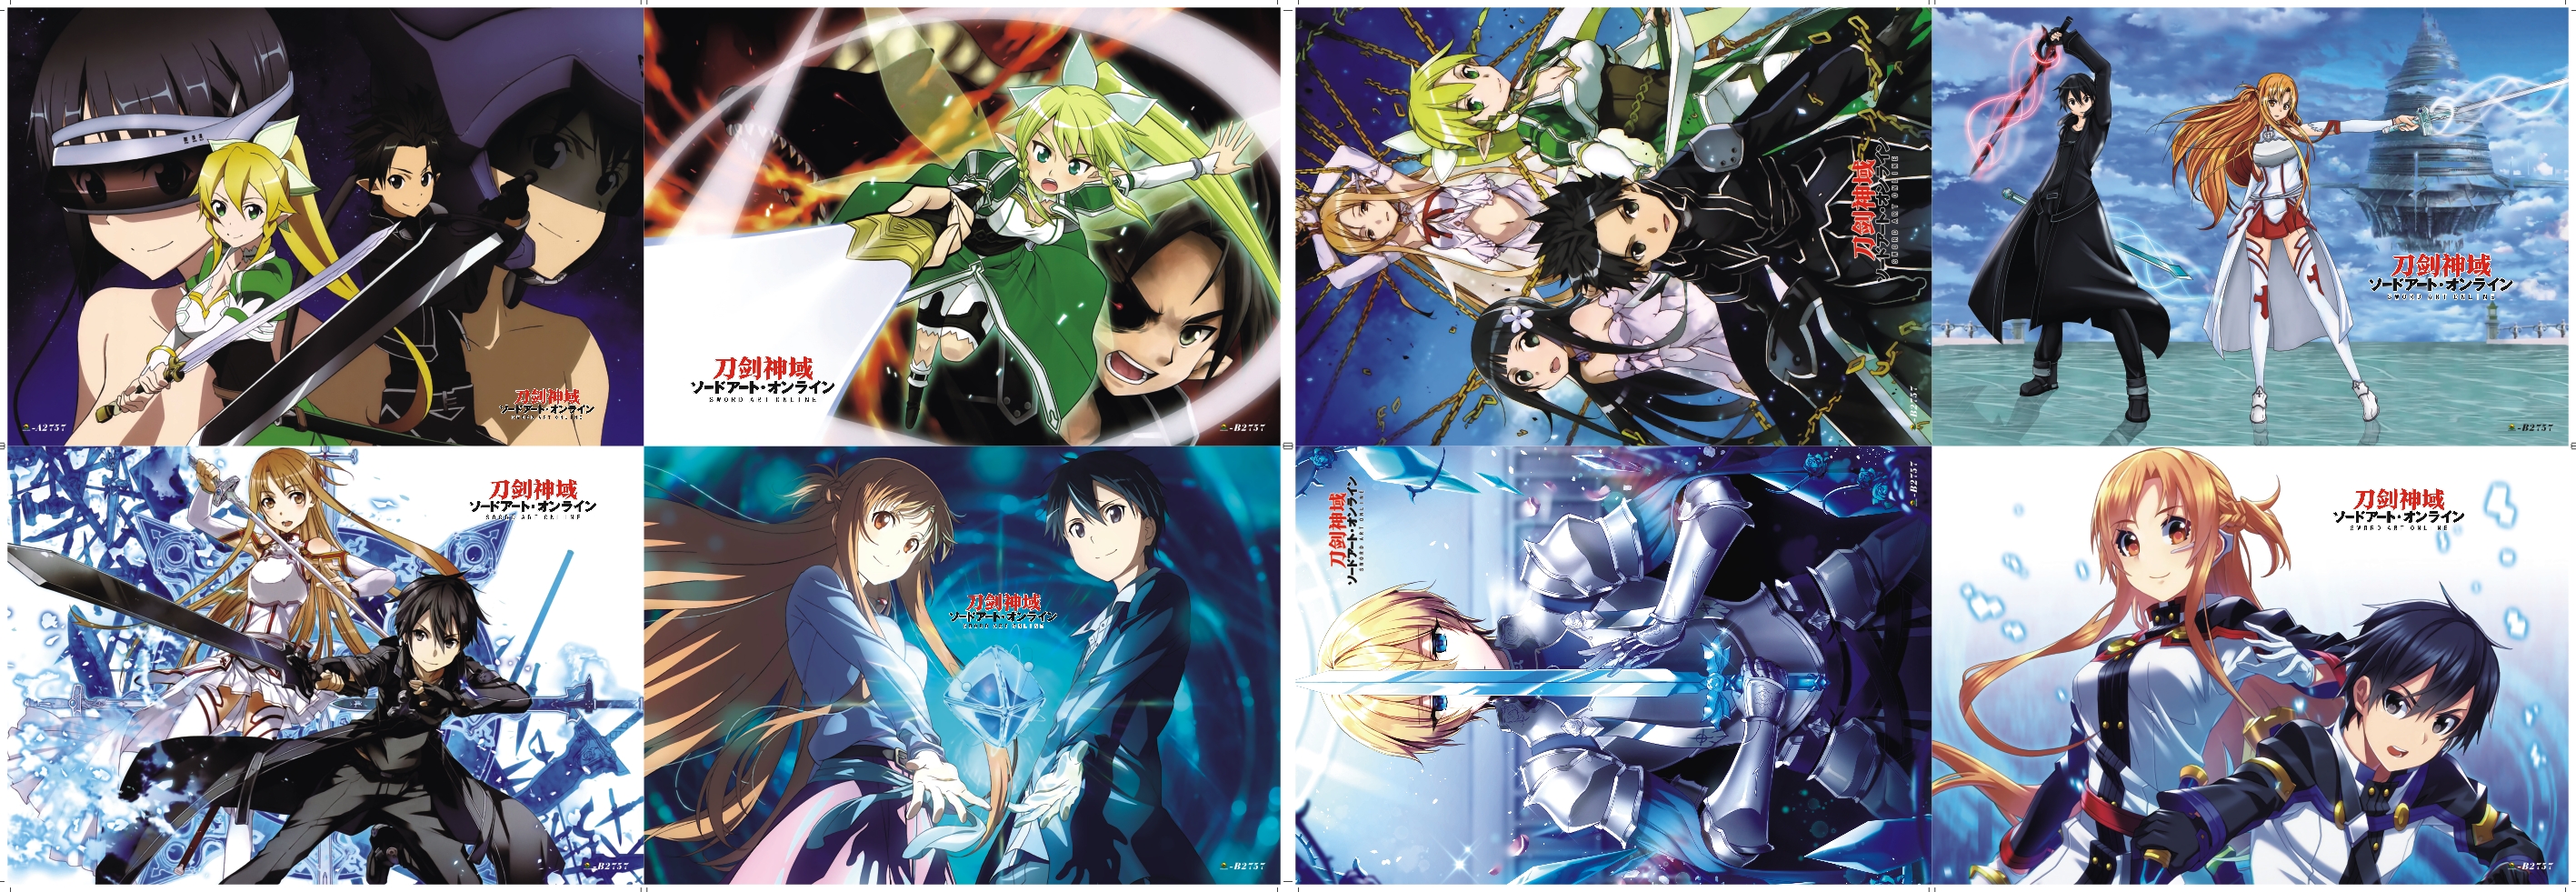 Sword art online anime posters price for a set of 8 pcs